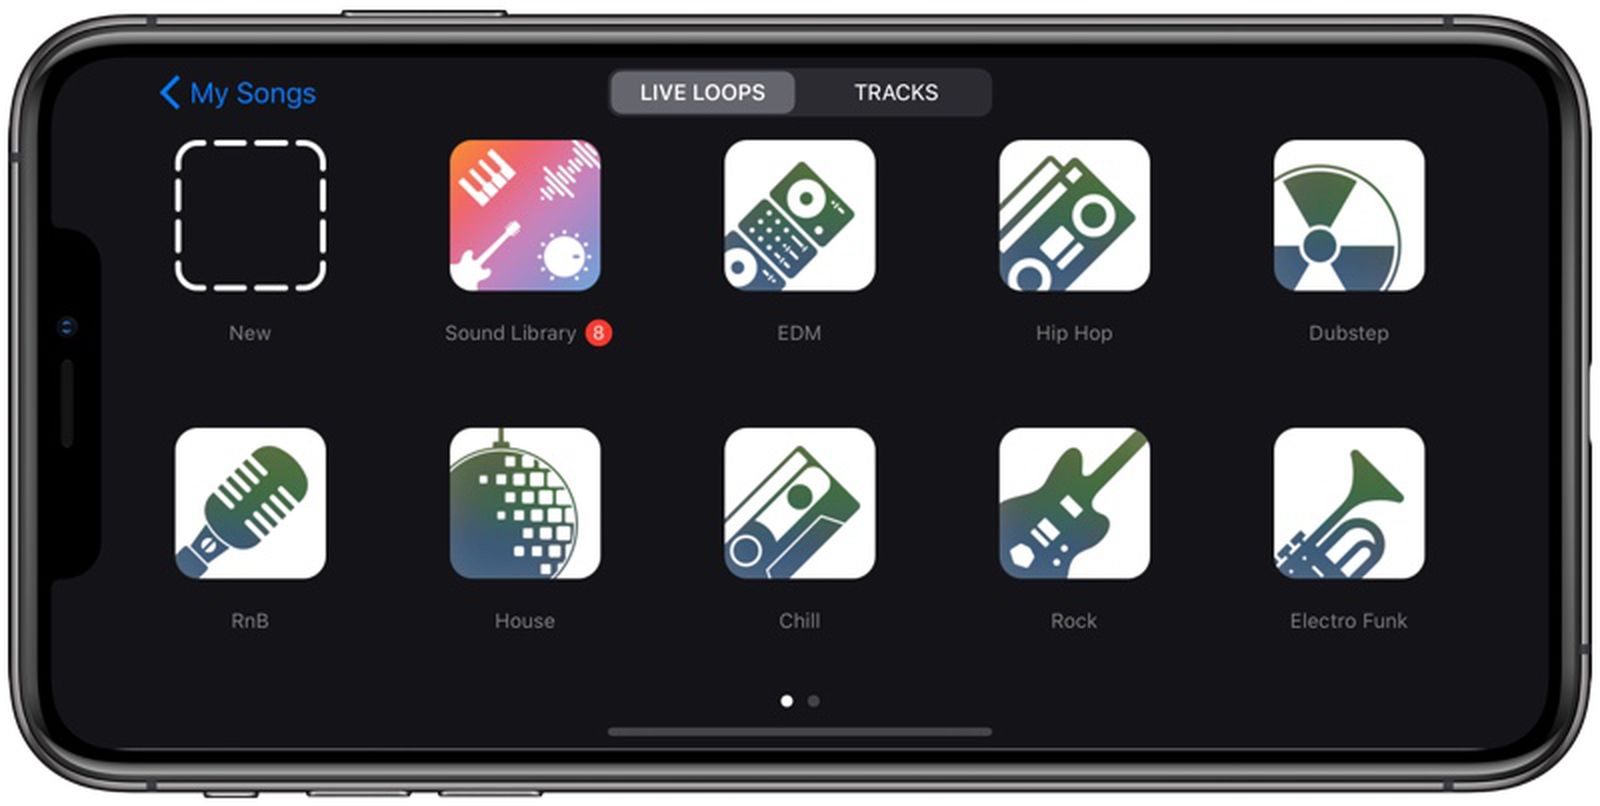 How to send garageband projects from iphone to mac pro